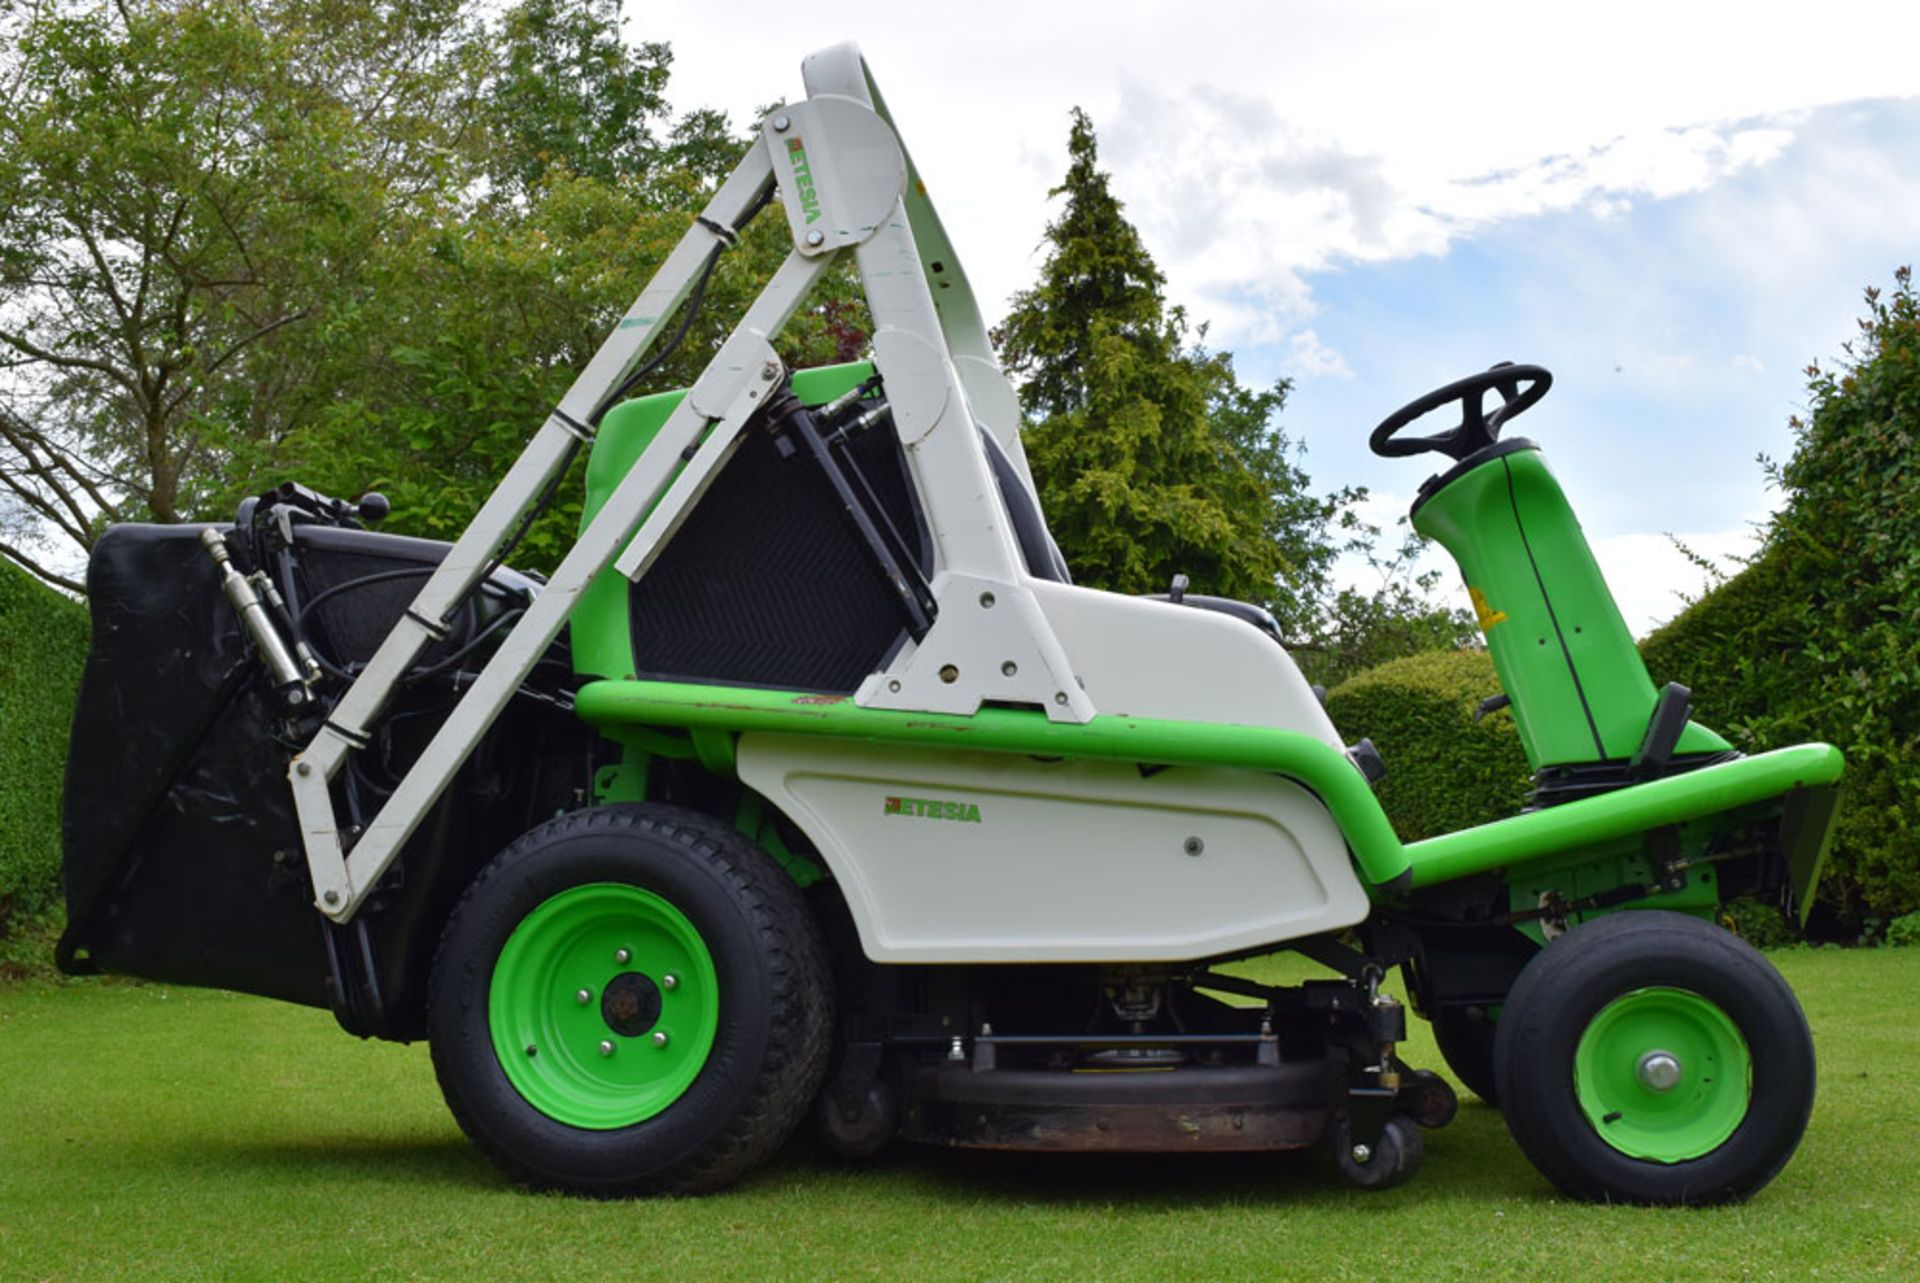 Etesia Hydro 124DS Ride On Rotary Mower - Image 2 of 15